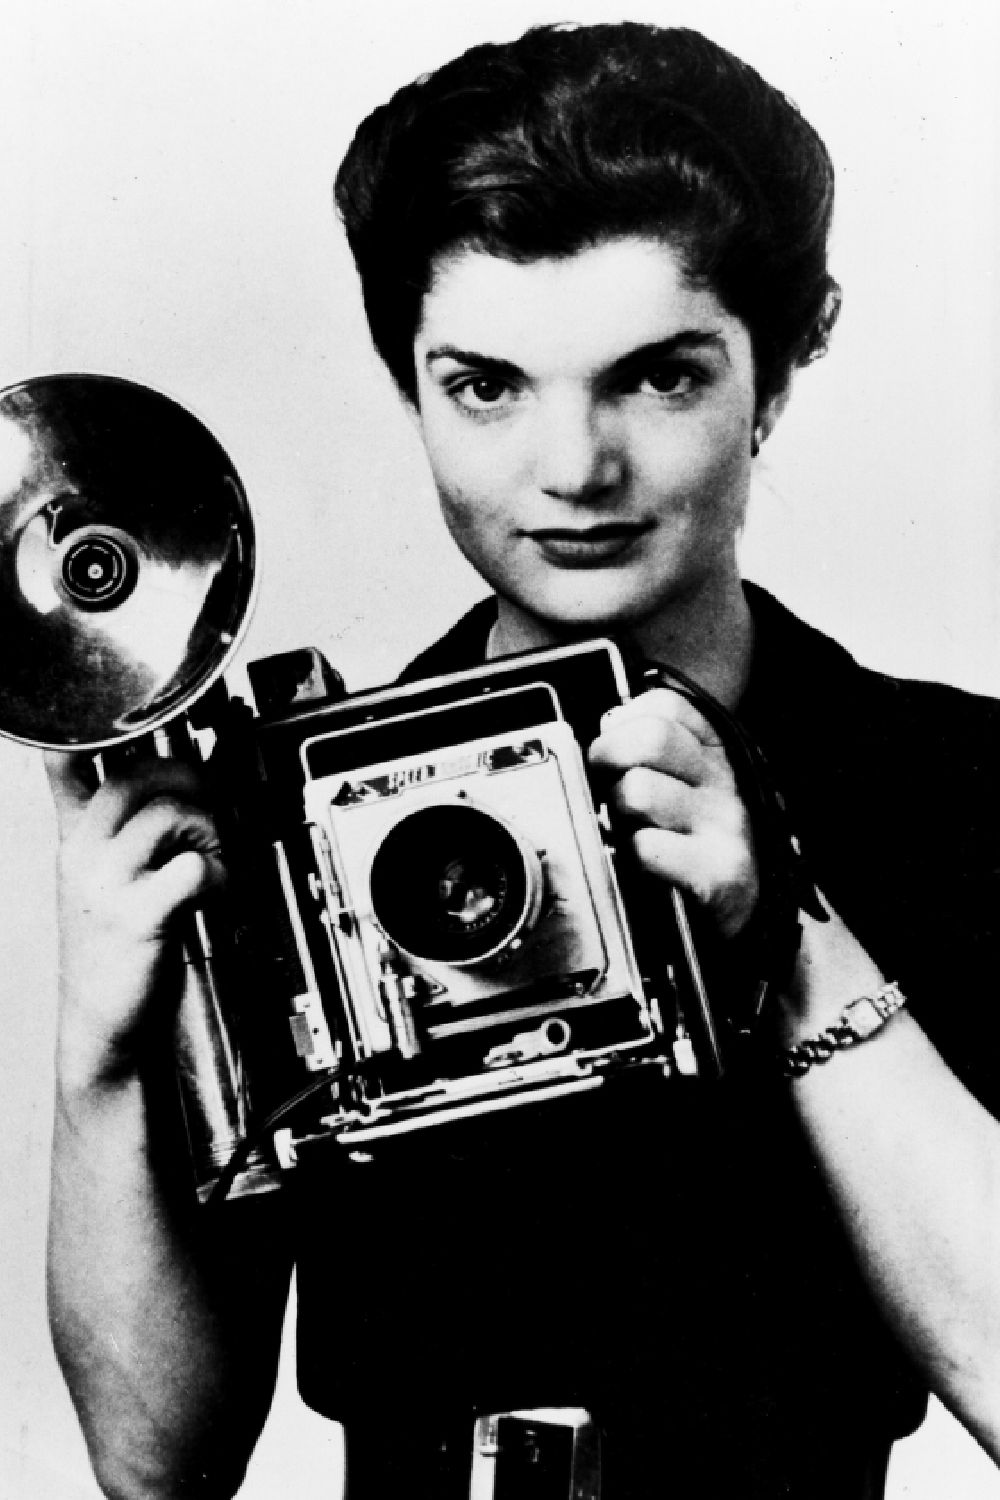 <p>                     One of the thousands of journalists covering the coronation ceremony was a journalist called Jacqueline Bouvier, writing up the big day for the <em>Washington Times-Herald</em>. This young journalist went on to become Jackie Kennedy, the First Lady of the United States.                   </p>